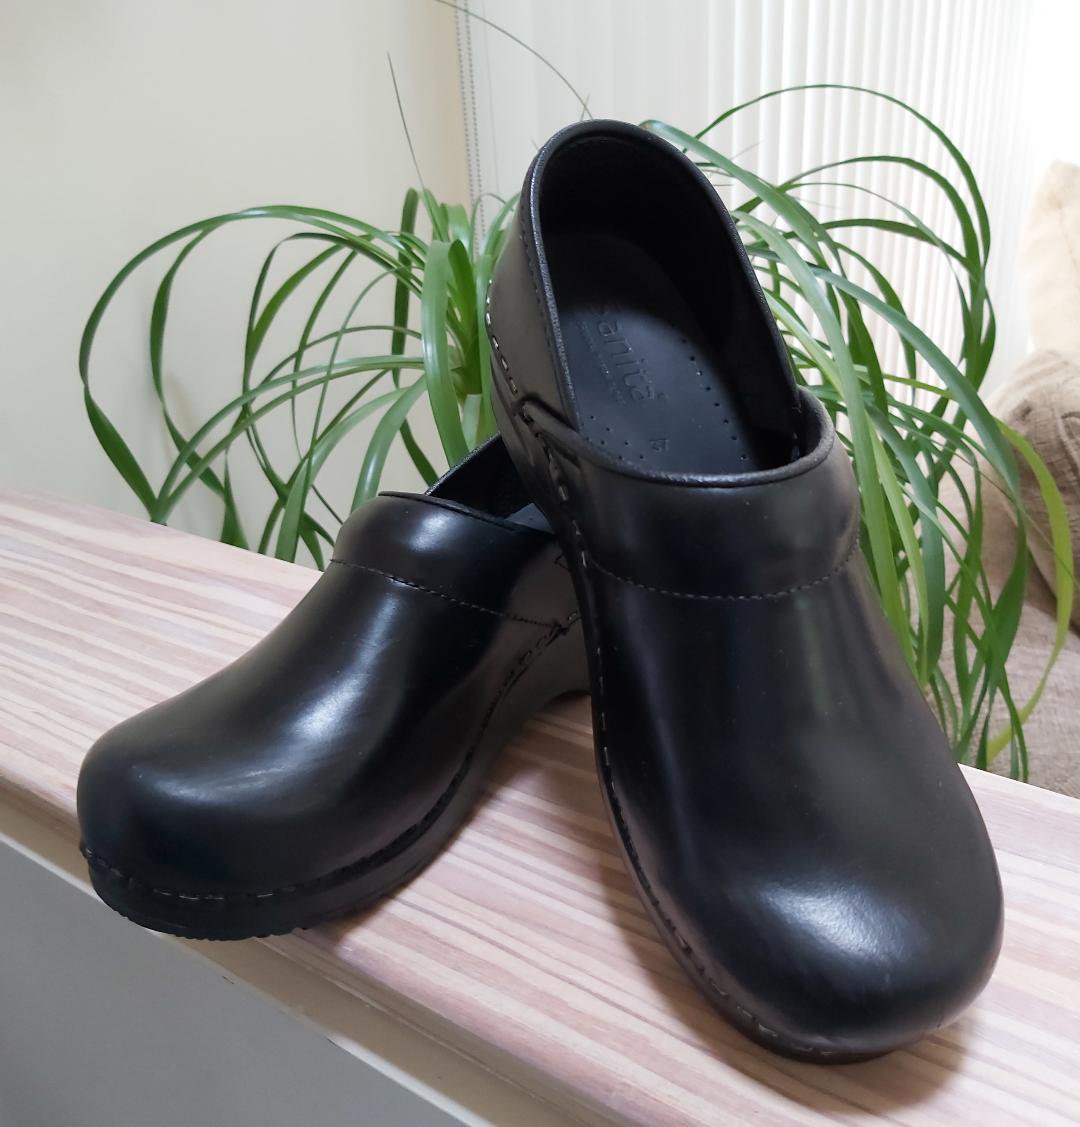 Sanita 'Professional PU Style Smooth' Closed Clogs Shoes - Black - Size 37!